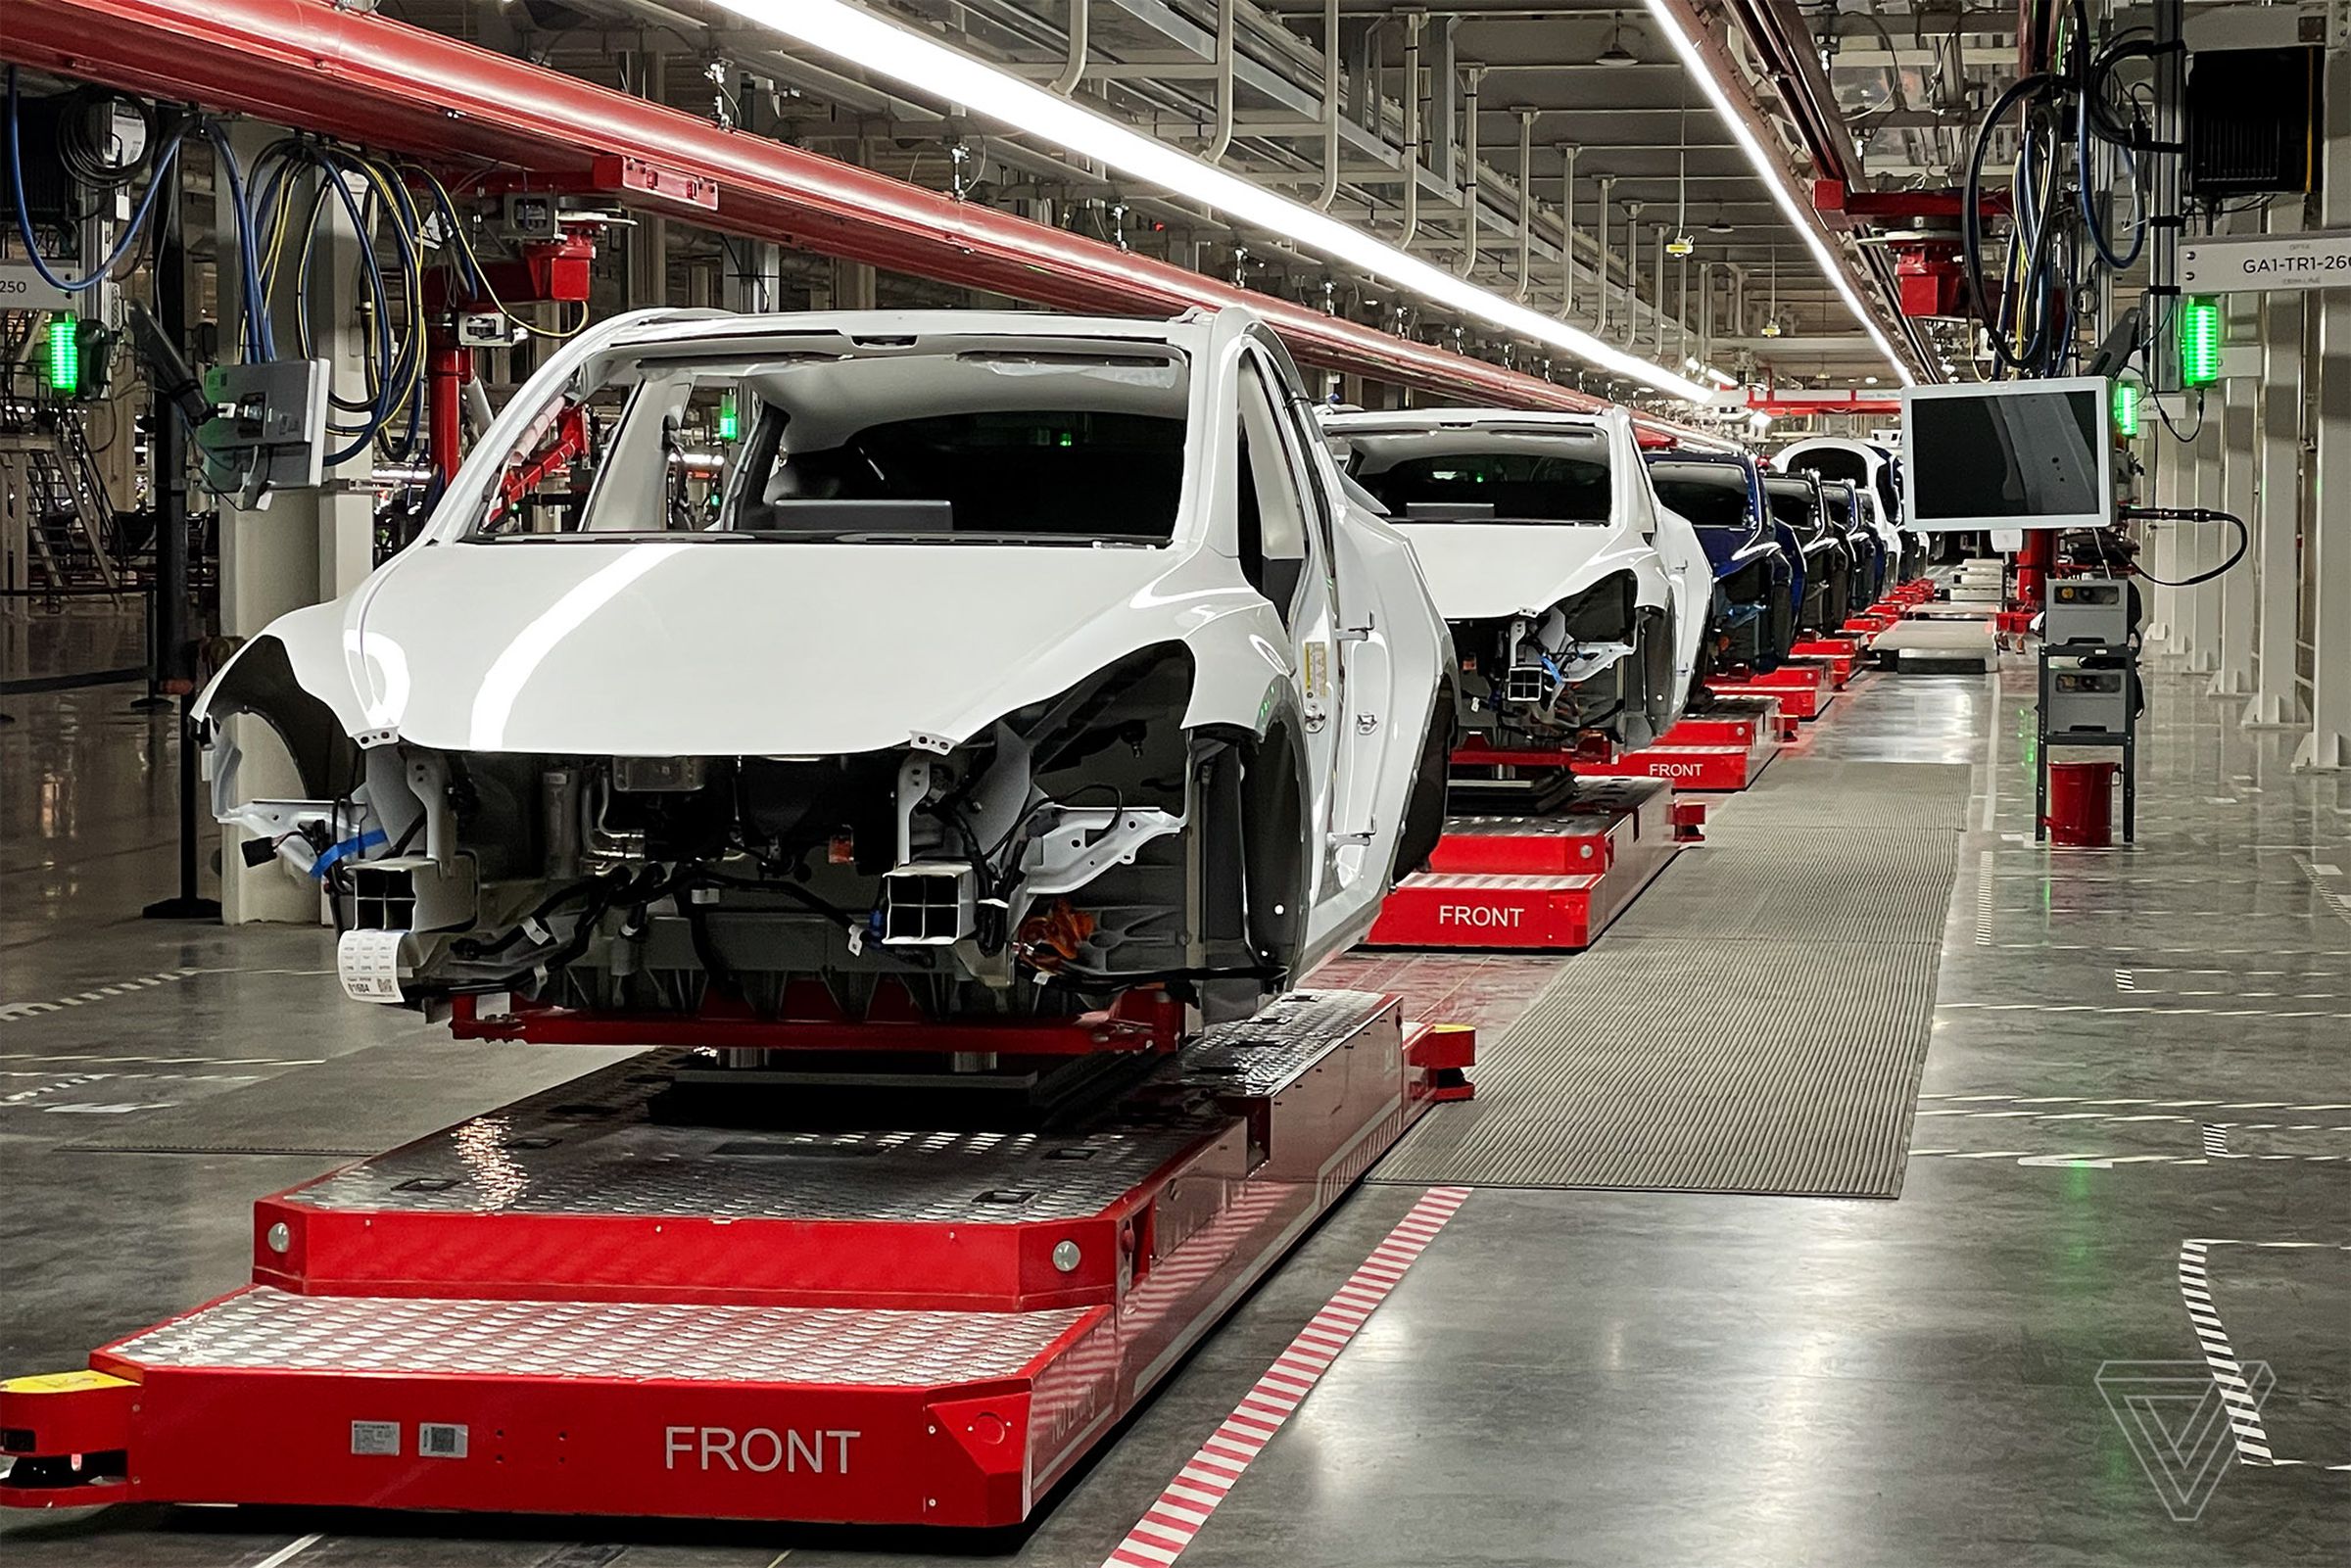 Unfinished Tesla model Y vehicles on factory assembly line platforms, no bumpers or headlights attached yet.